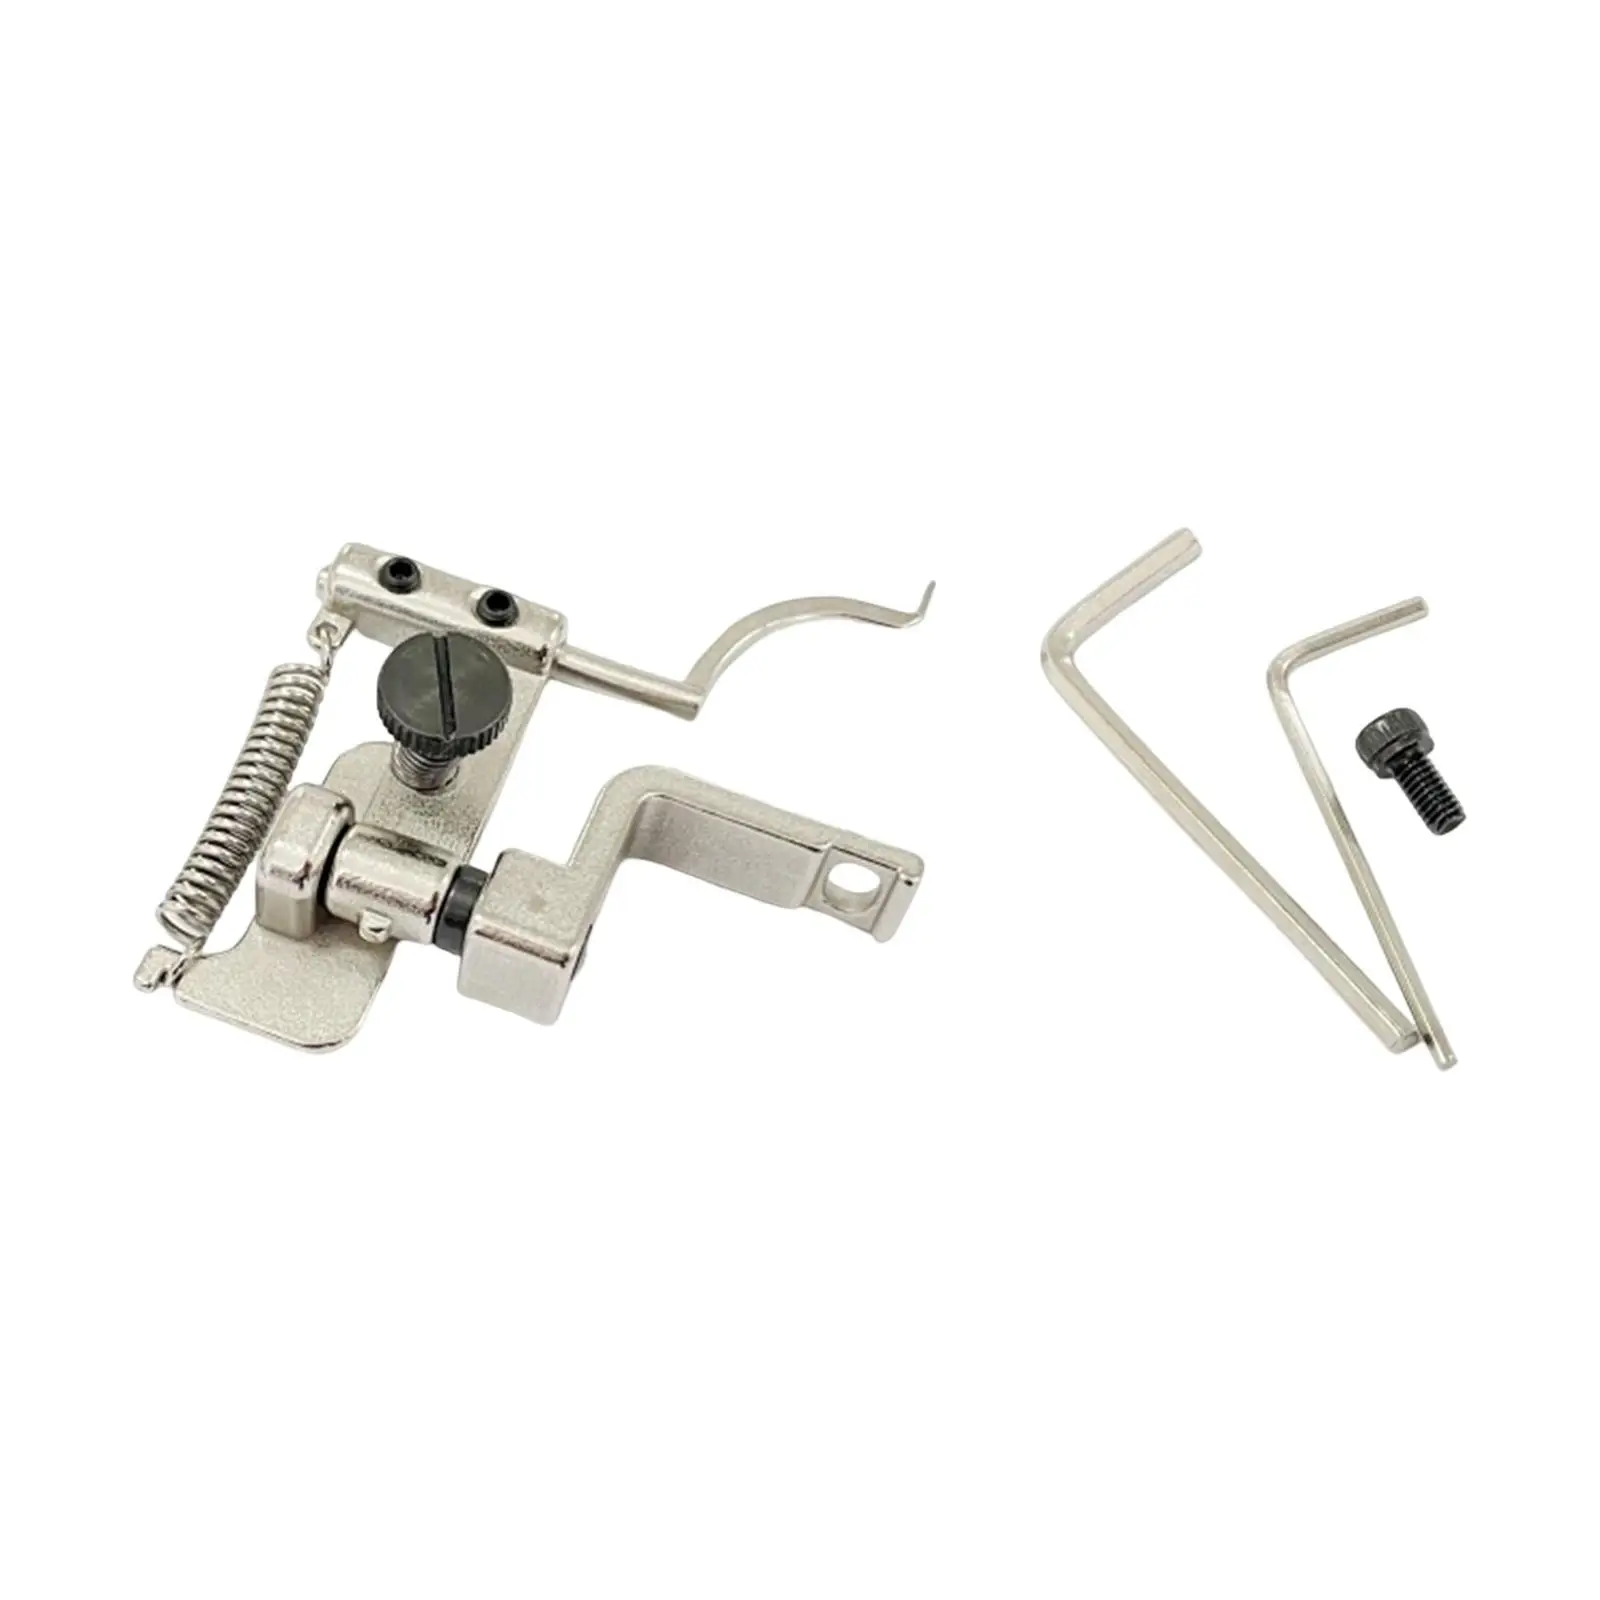 Suspended Edge Guide Seams Stitch Presser Edge Guide with Mounting Screws Universal Locator for Industrial Sewing Machines 891